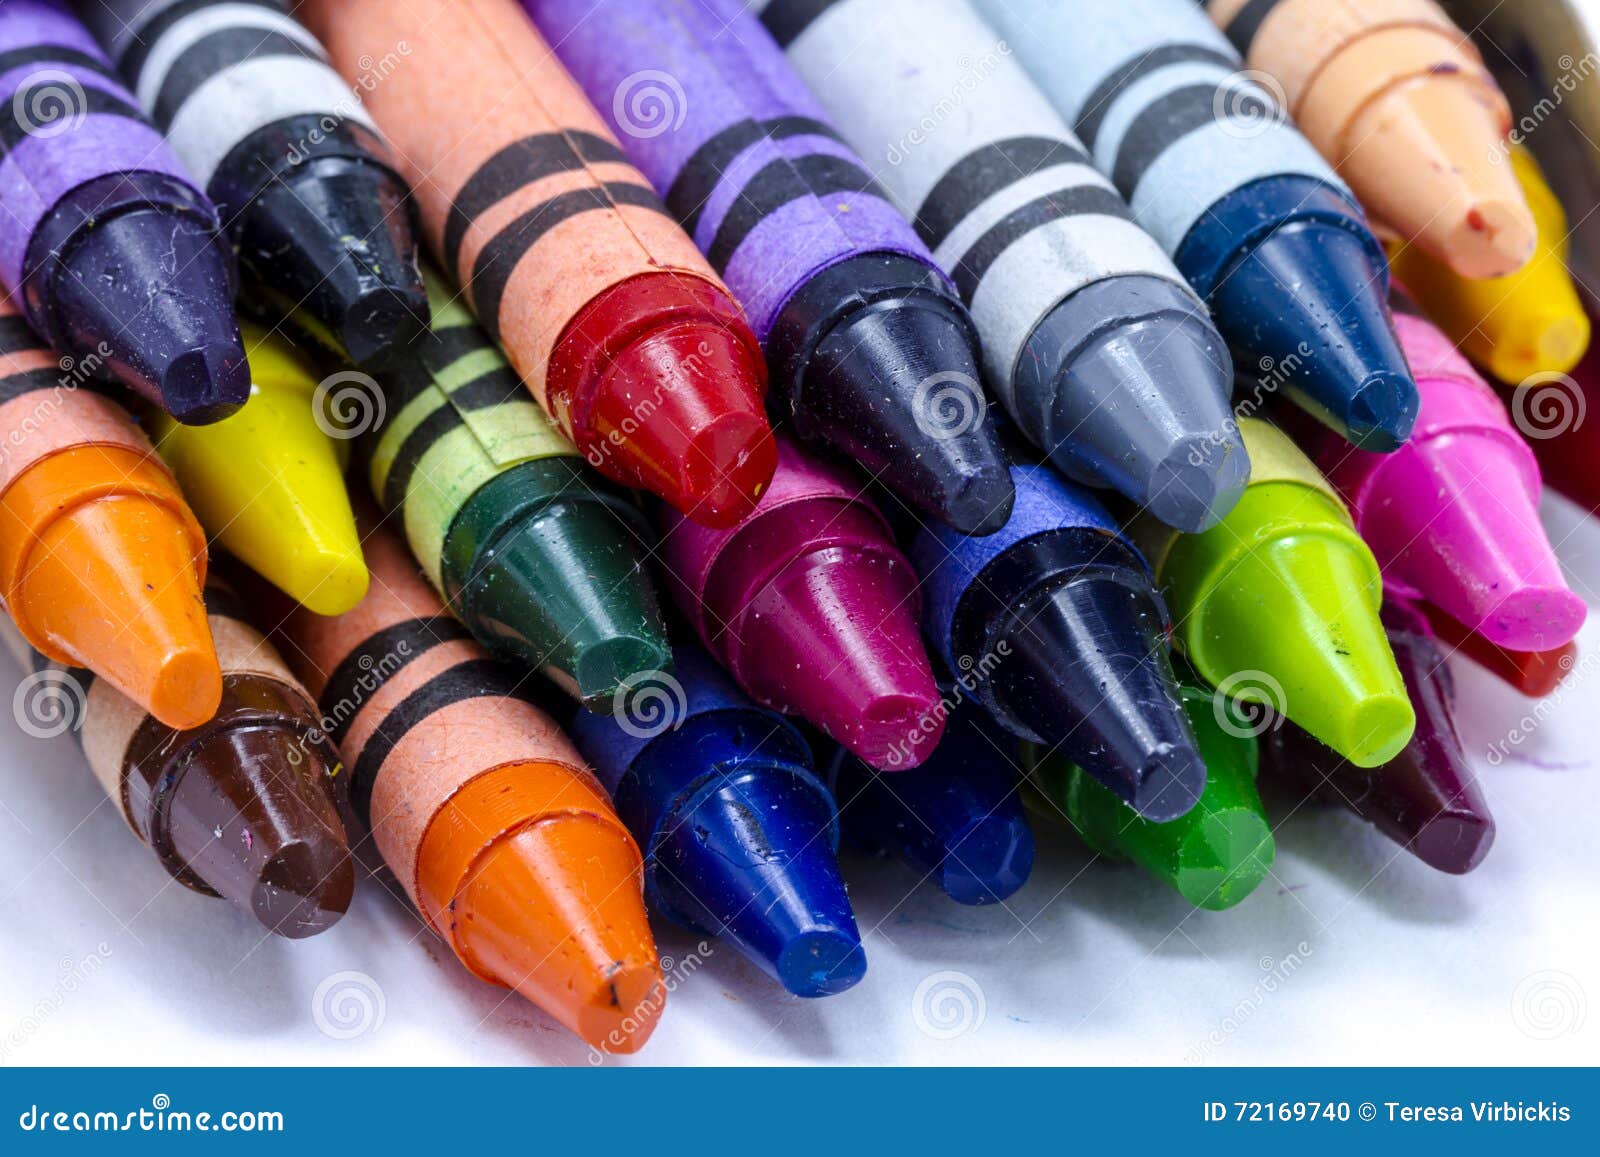 173 Grease Pencil Stock Photos - Free & Royalty-Free Stock Photos from  Dreamstime